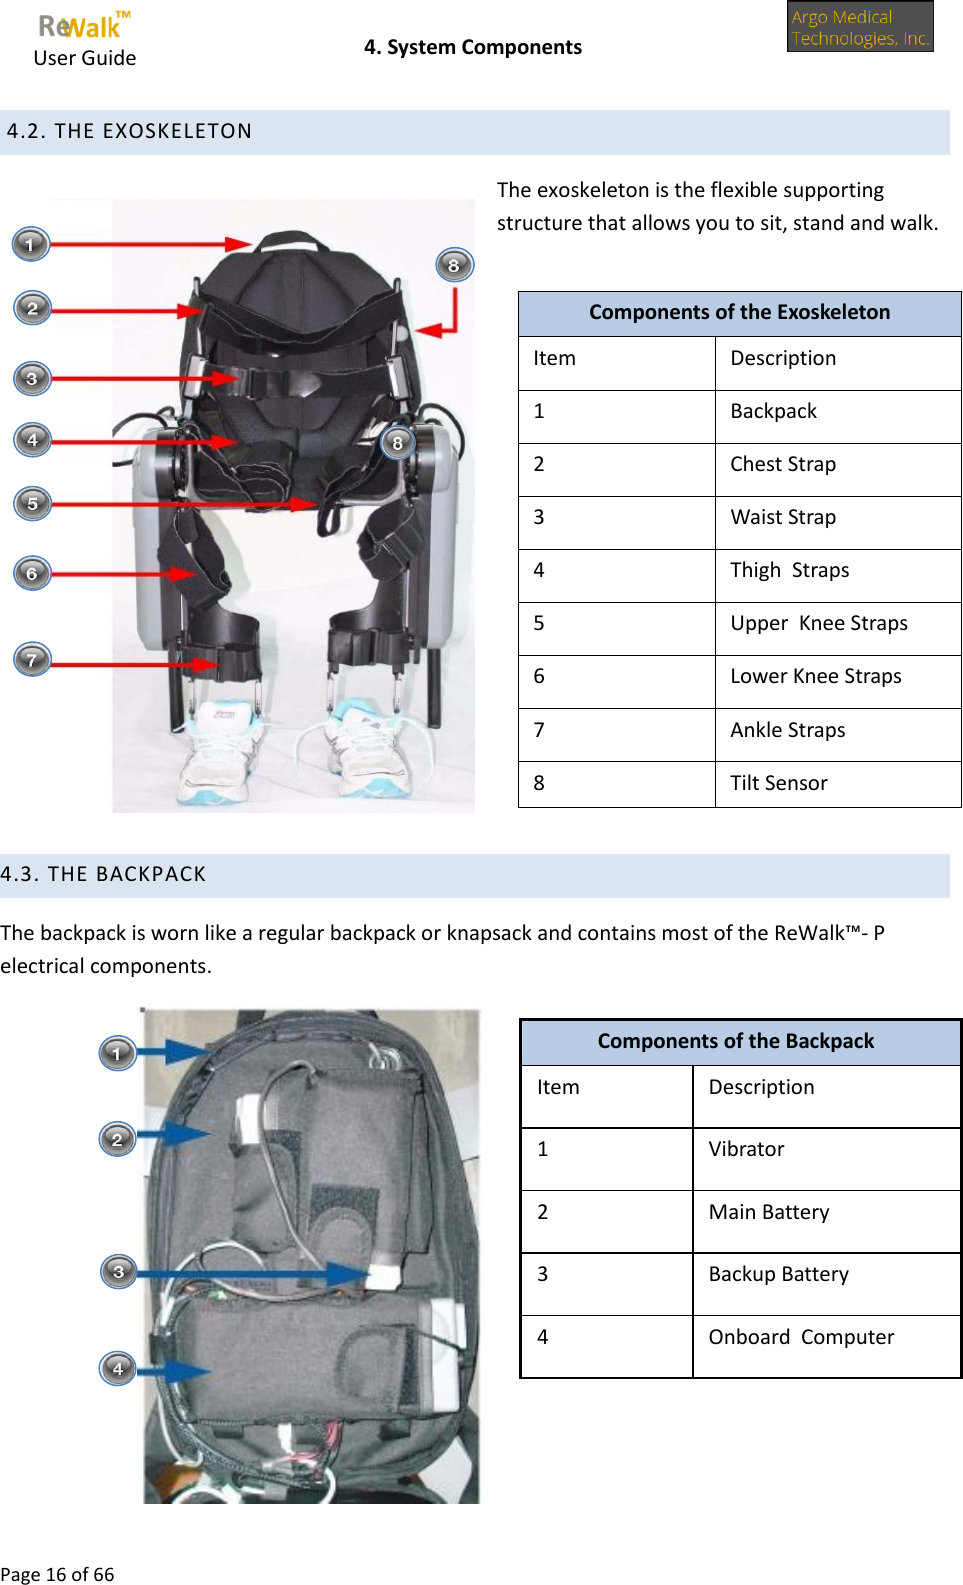     User Guide    4. System Components  Page 16 of 66   4.2. THE EXOSKELETON The exoskeleton is the flexible supporting structure that allows you to sit, stand and walk.     4.3. THE BACKPACK The backpack is worn like a regular backpack or knapsack and contains most of the ReWalk™- P electrical components.           Components of the Exoskeleton Item Description 1 Backpack 2 Chest Strap  3 Waist Strap  4 Thigh  Straps  5 Upper  Knee Straps  6 Lower Knee Straps  7 Ankle Straps 8 Tilt Sensor Components of the Backpack Item Description 1 Vibrator 2 Main Battery 3 Backup Battery 4 Onboard  Computer   